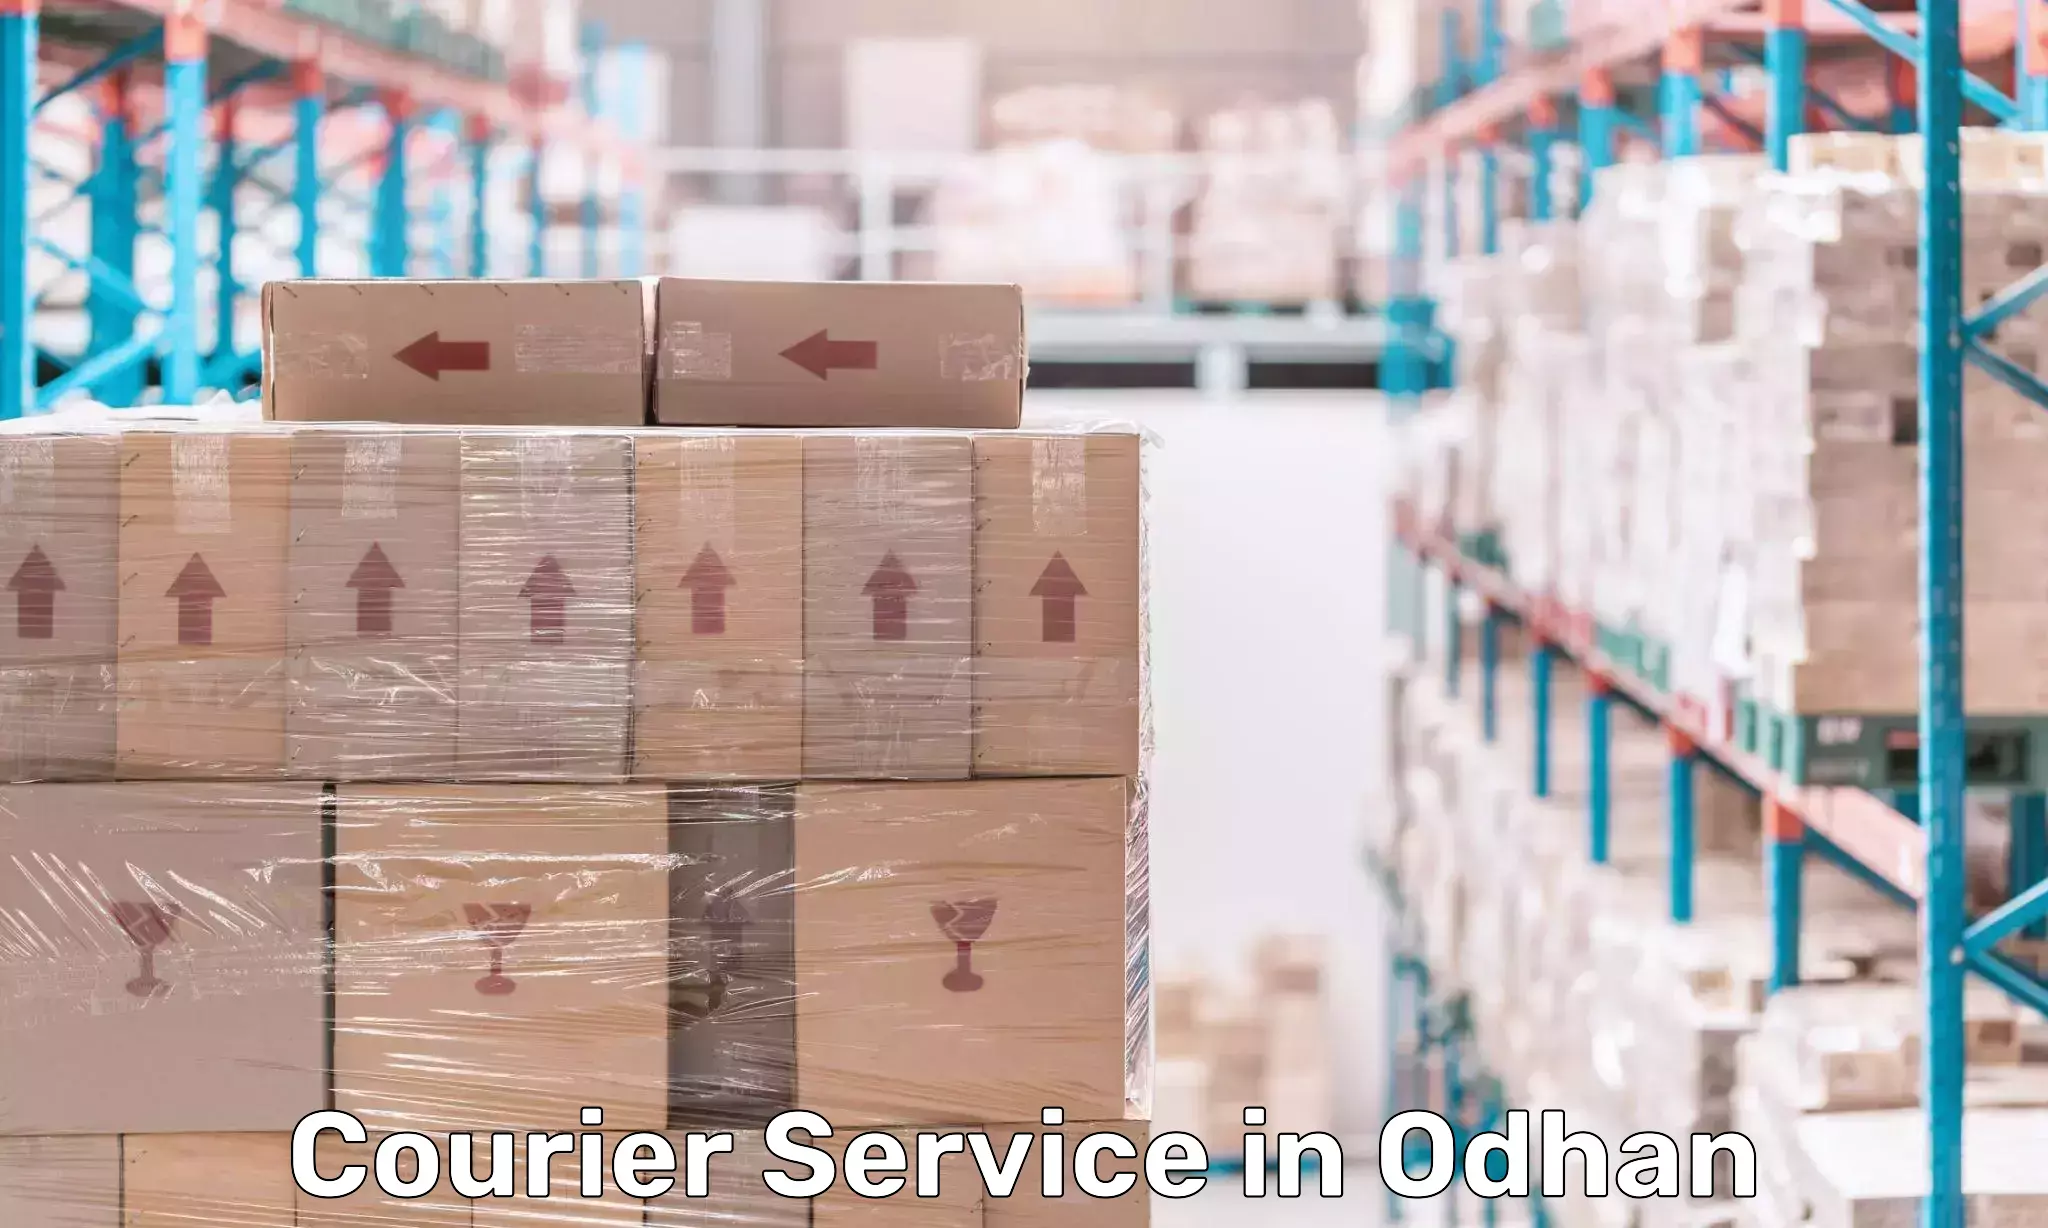 Efficient shipping operations in Odhan